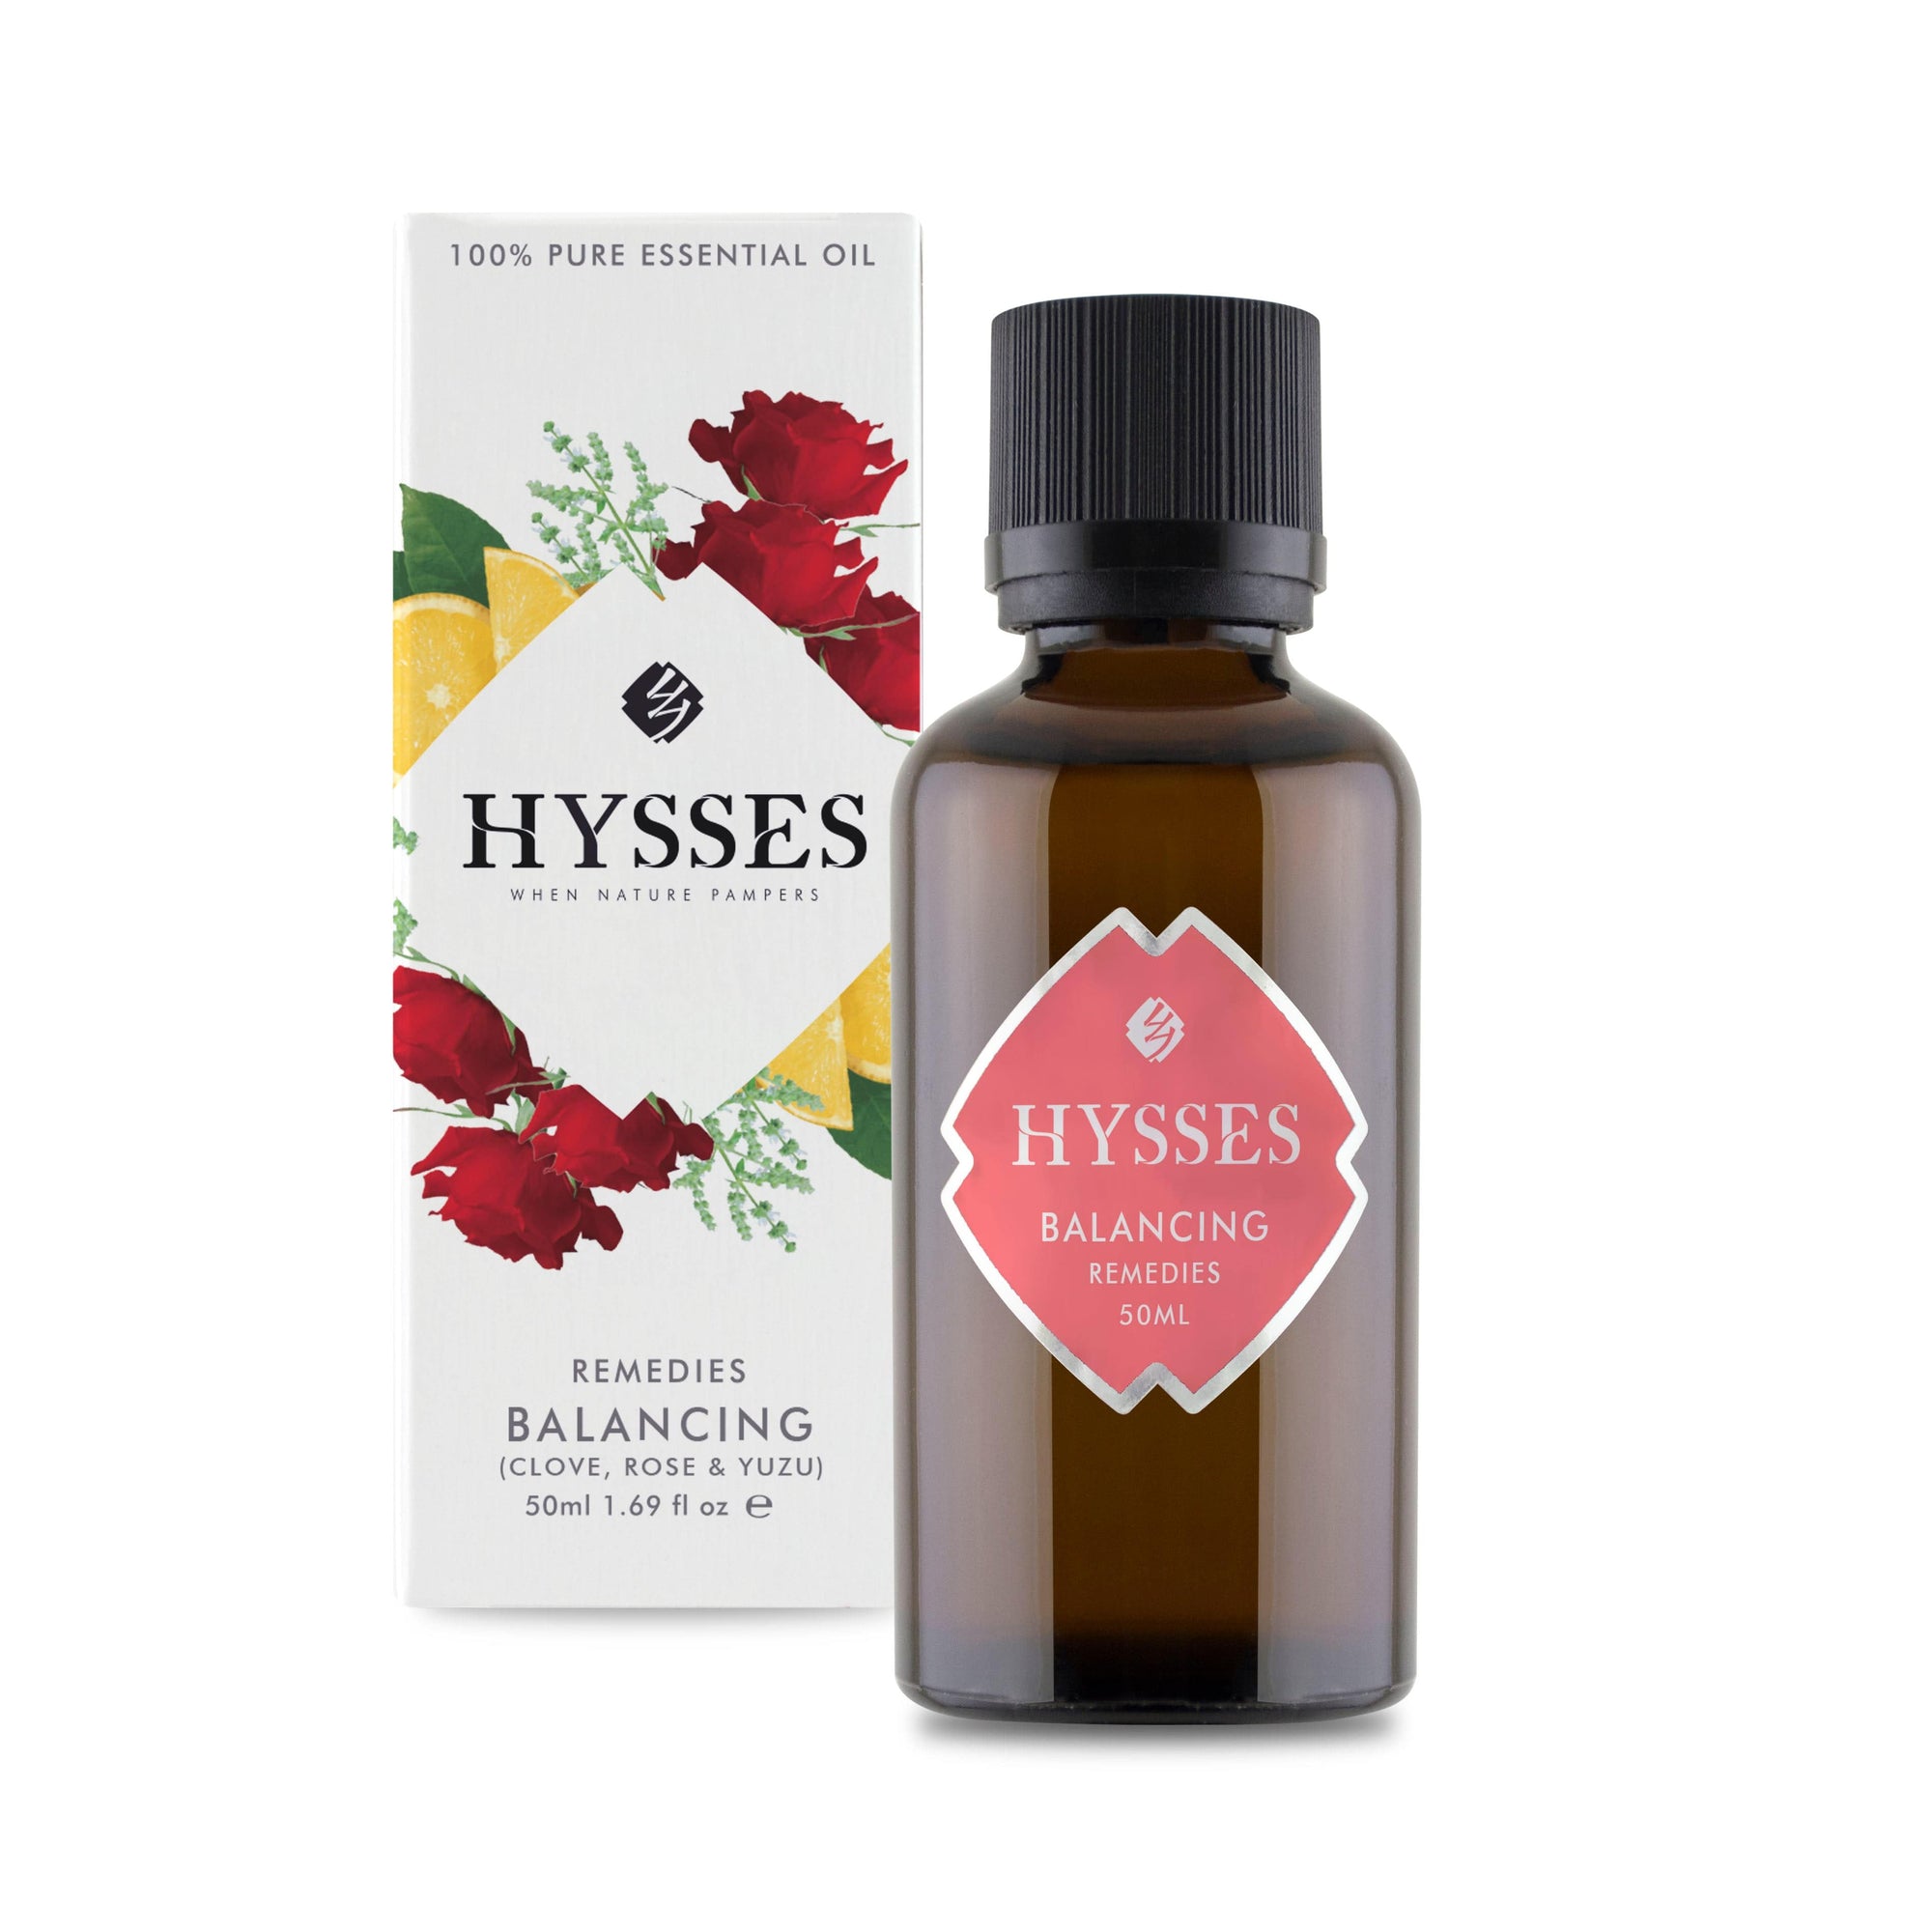 Hysses Essential Oil Remedies, Balancing